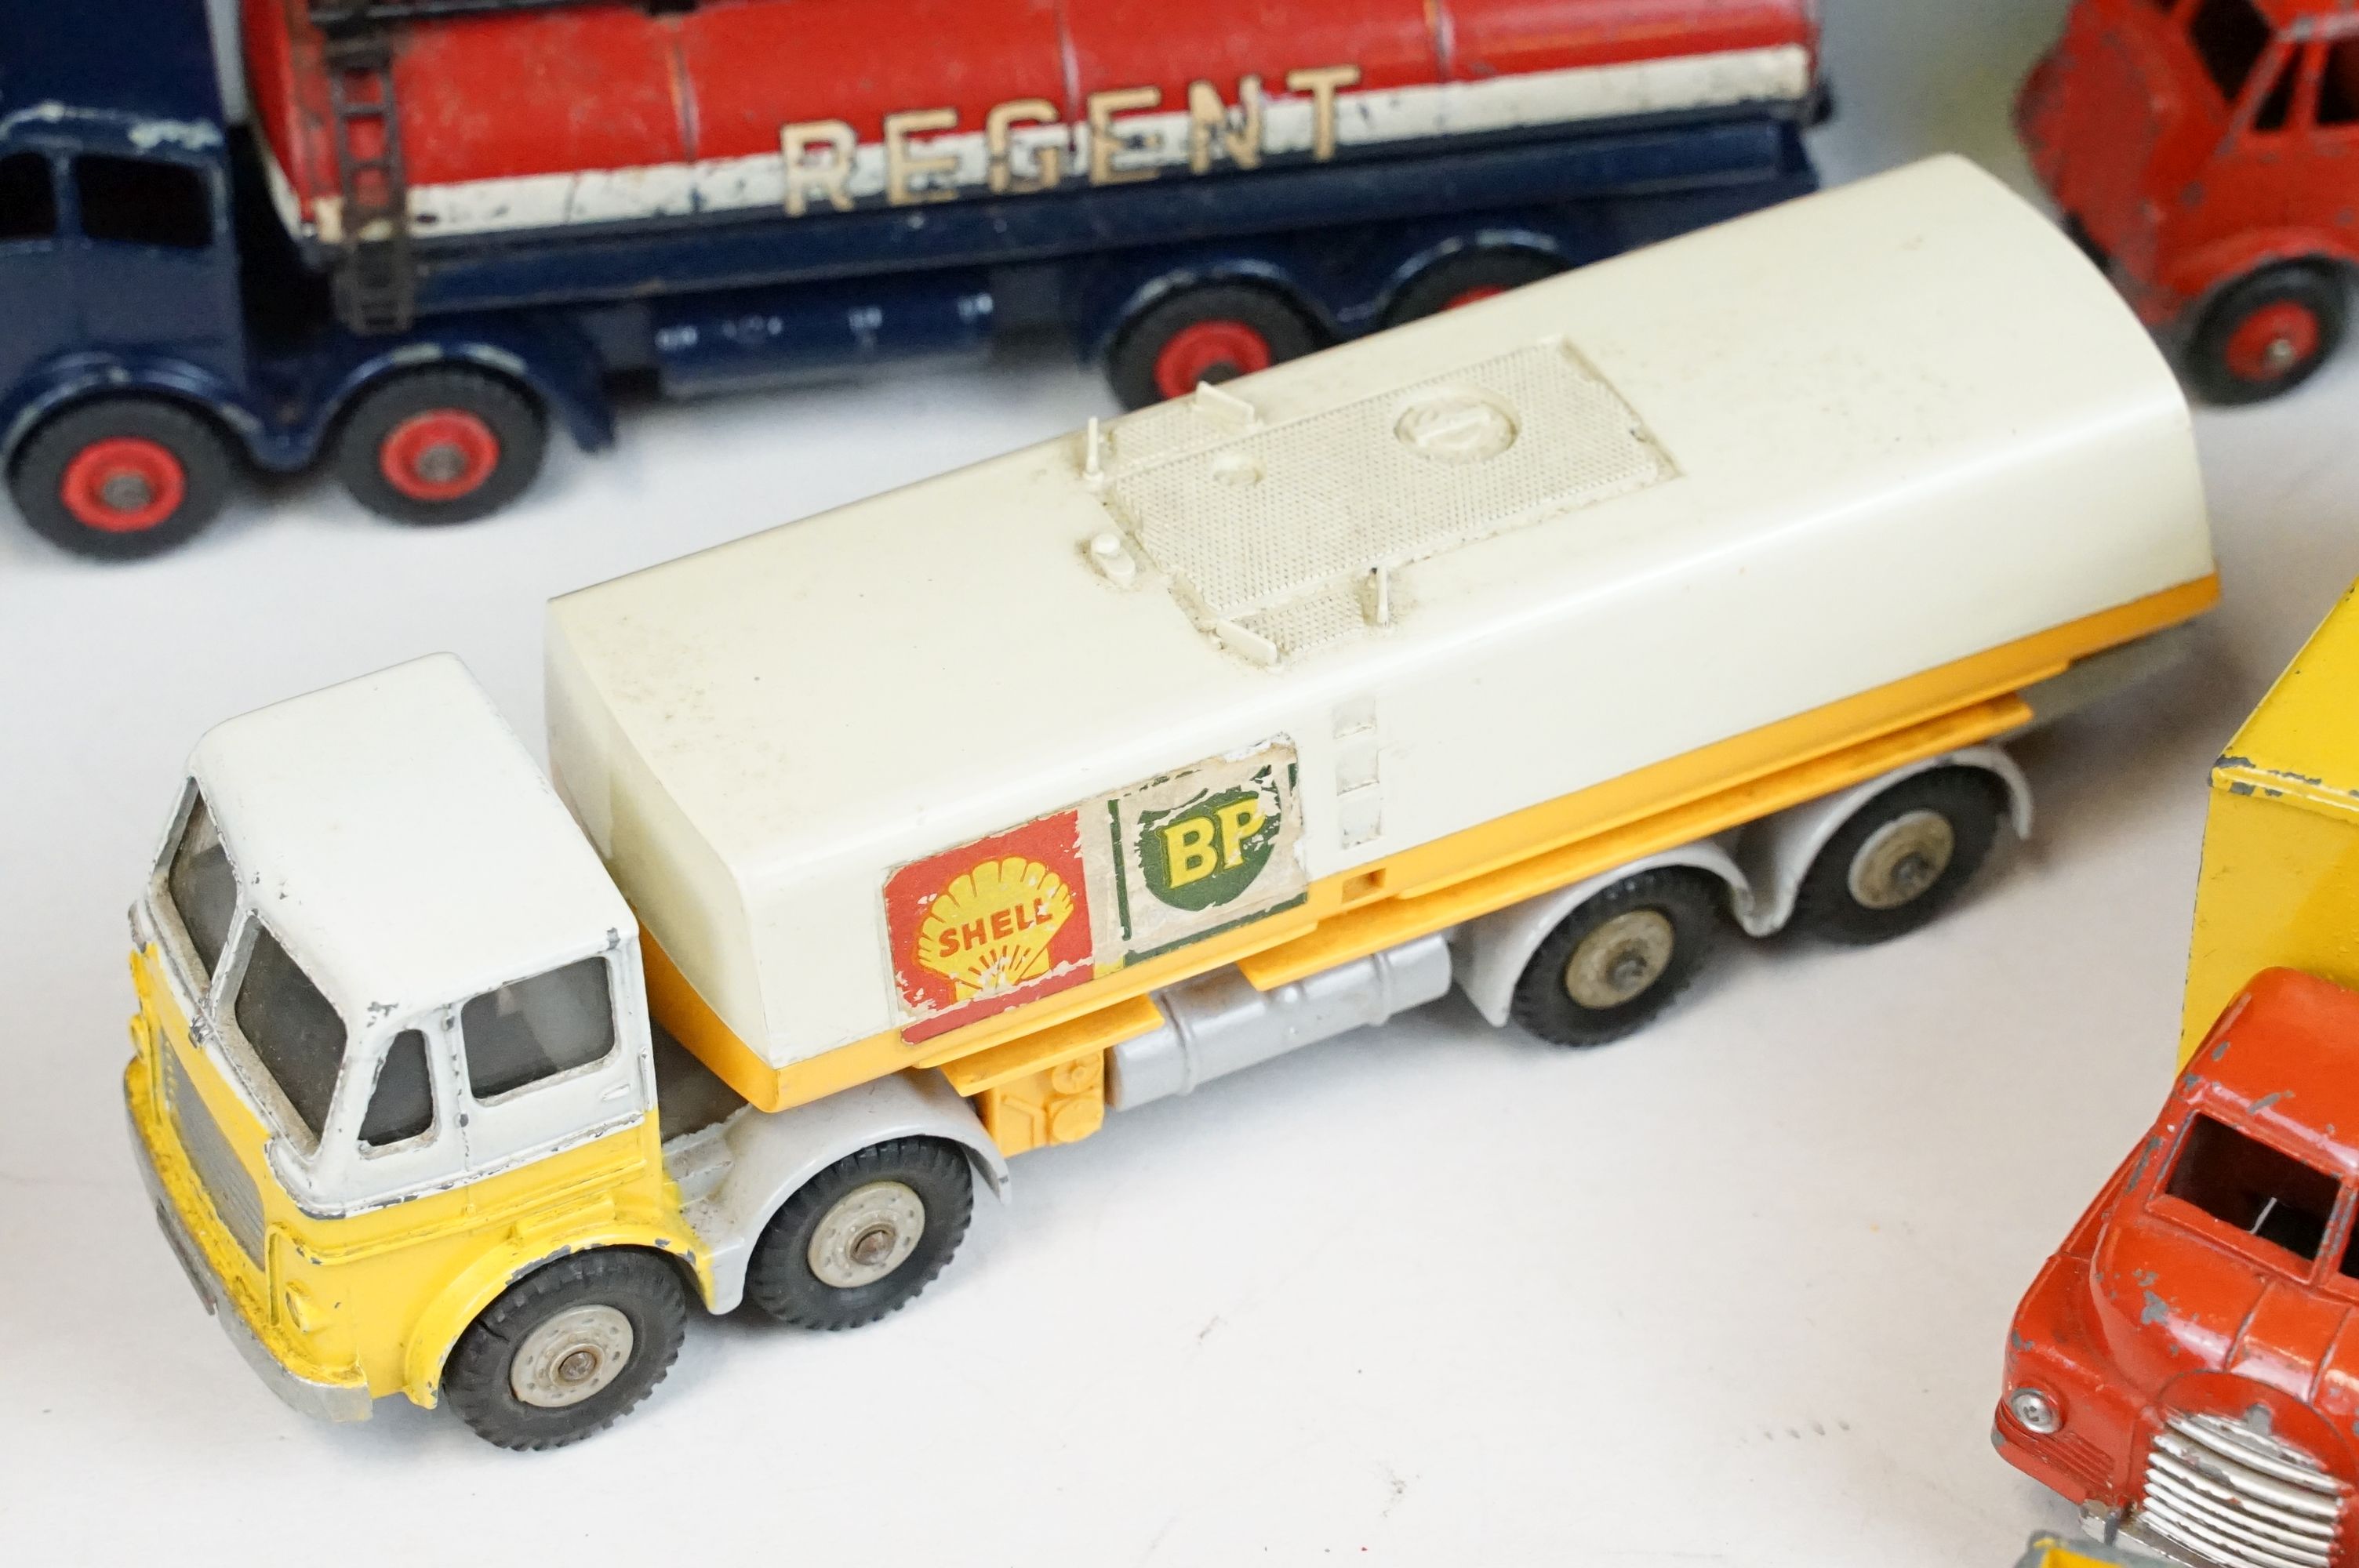 12 Mid 20th C Dinky diecast models to include Foden Fuel Tanker in Two-Tone light blue and dark blue - Image 8 of 9